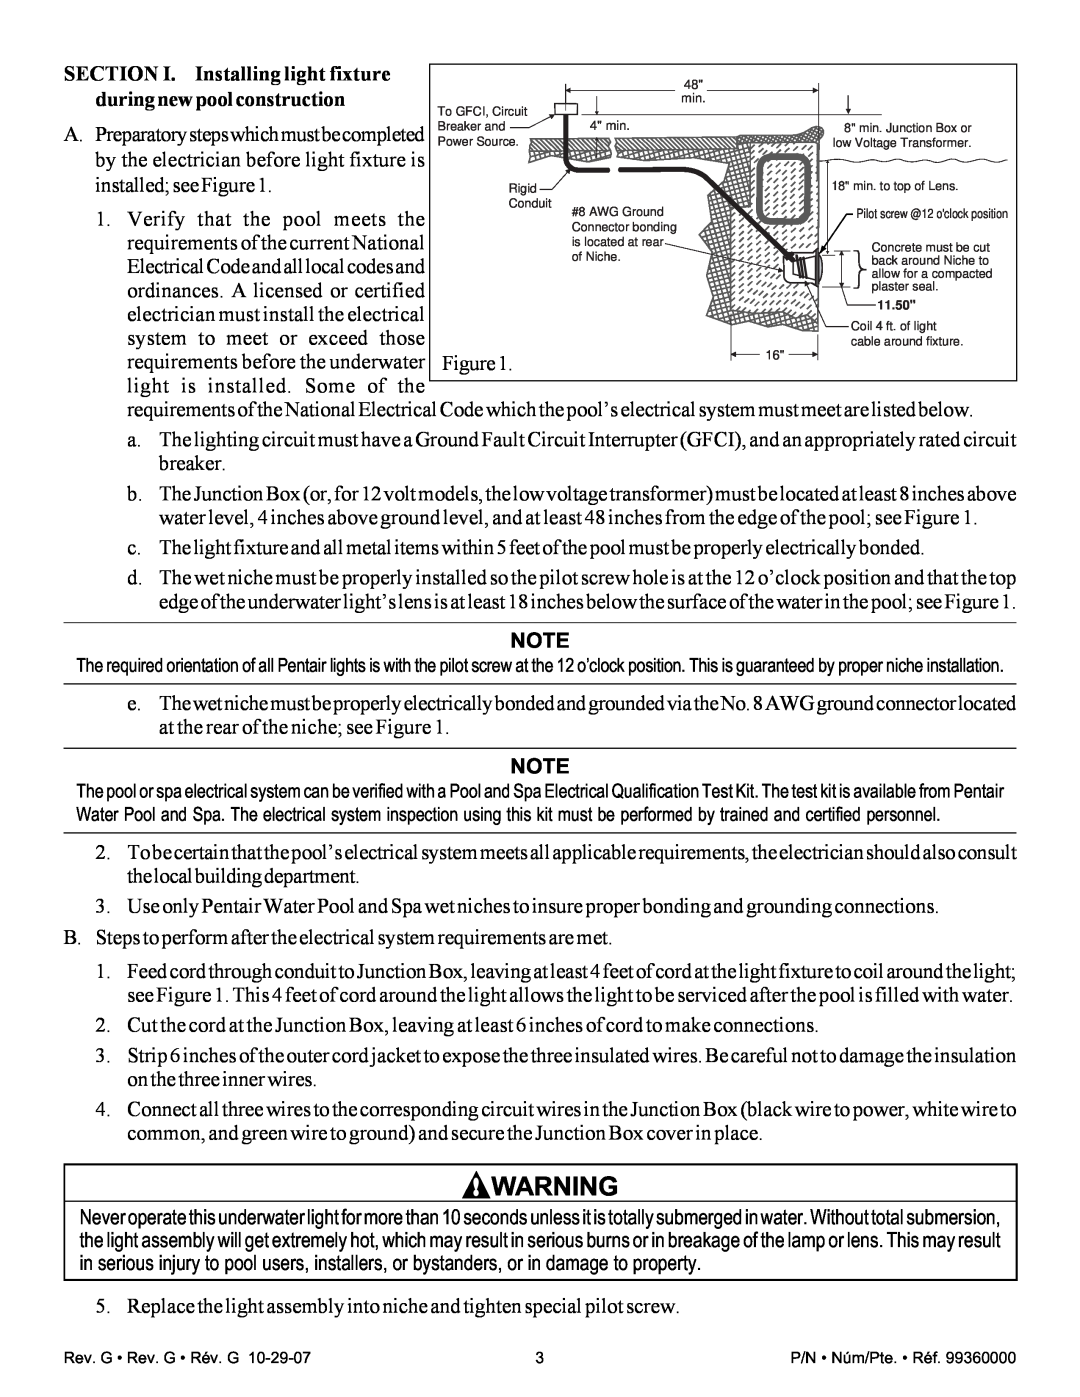 Pentair Amerlite important safety instructions SECTION I. Installing light fixture, duringnewpoolconstruction 